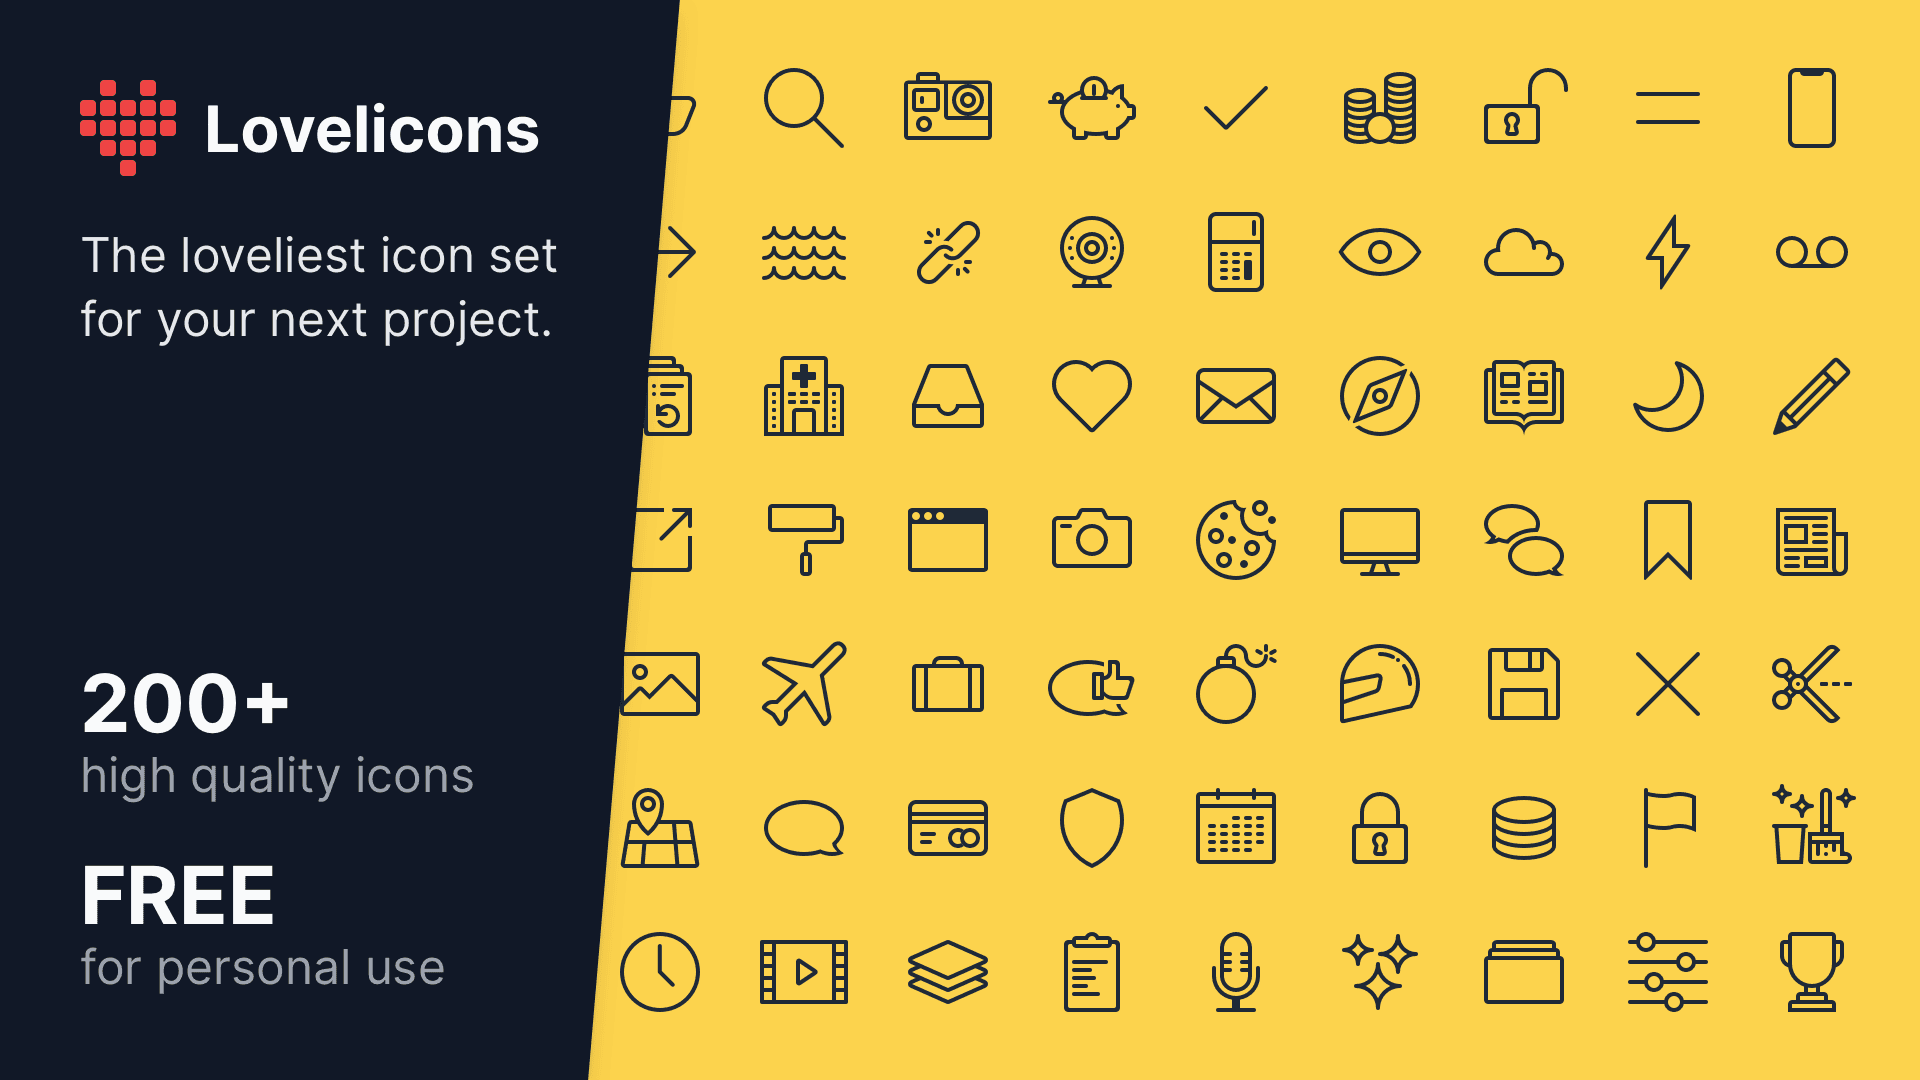 Lovelicons, the loveliest icon set for your next project.